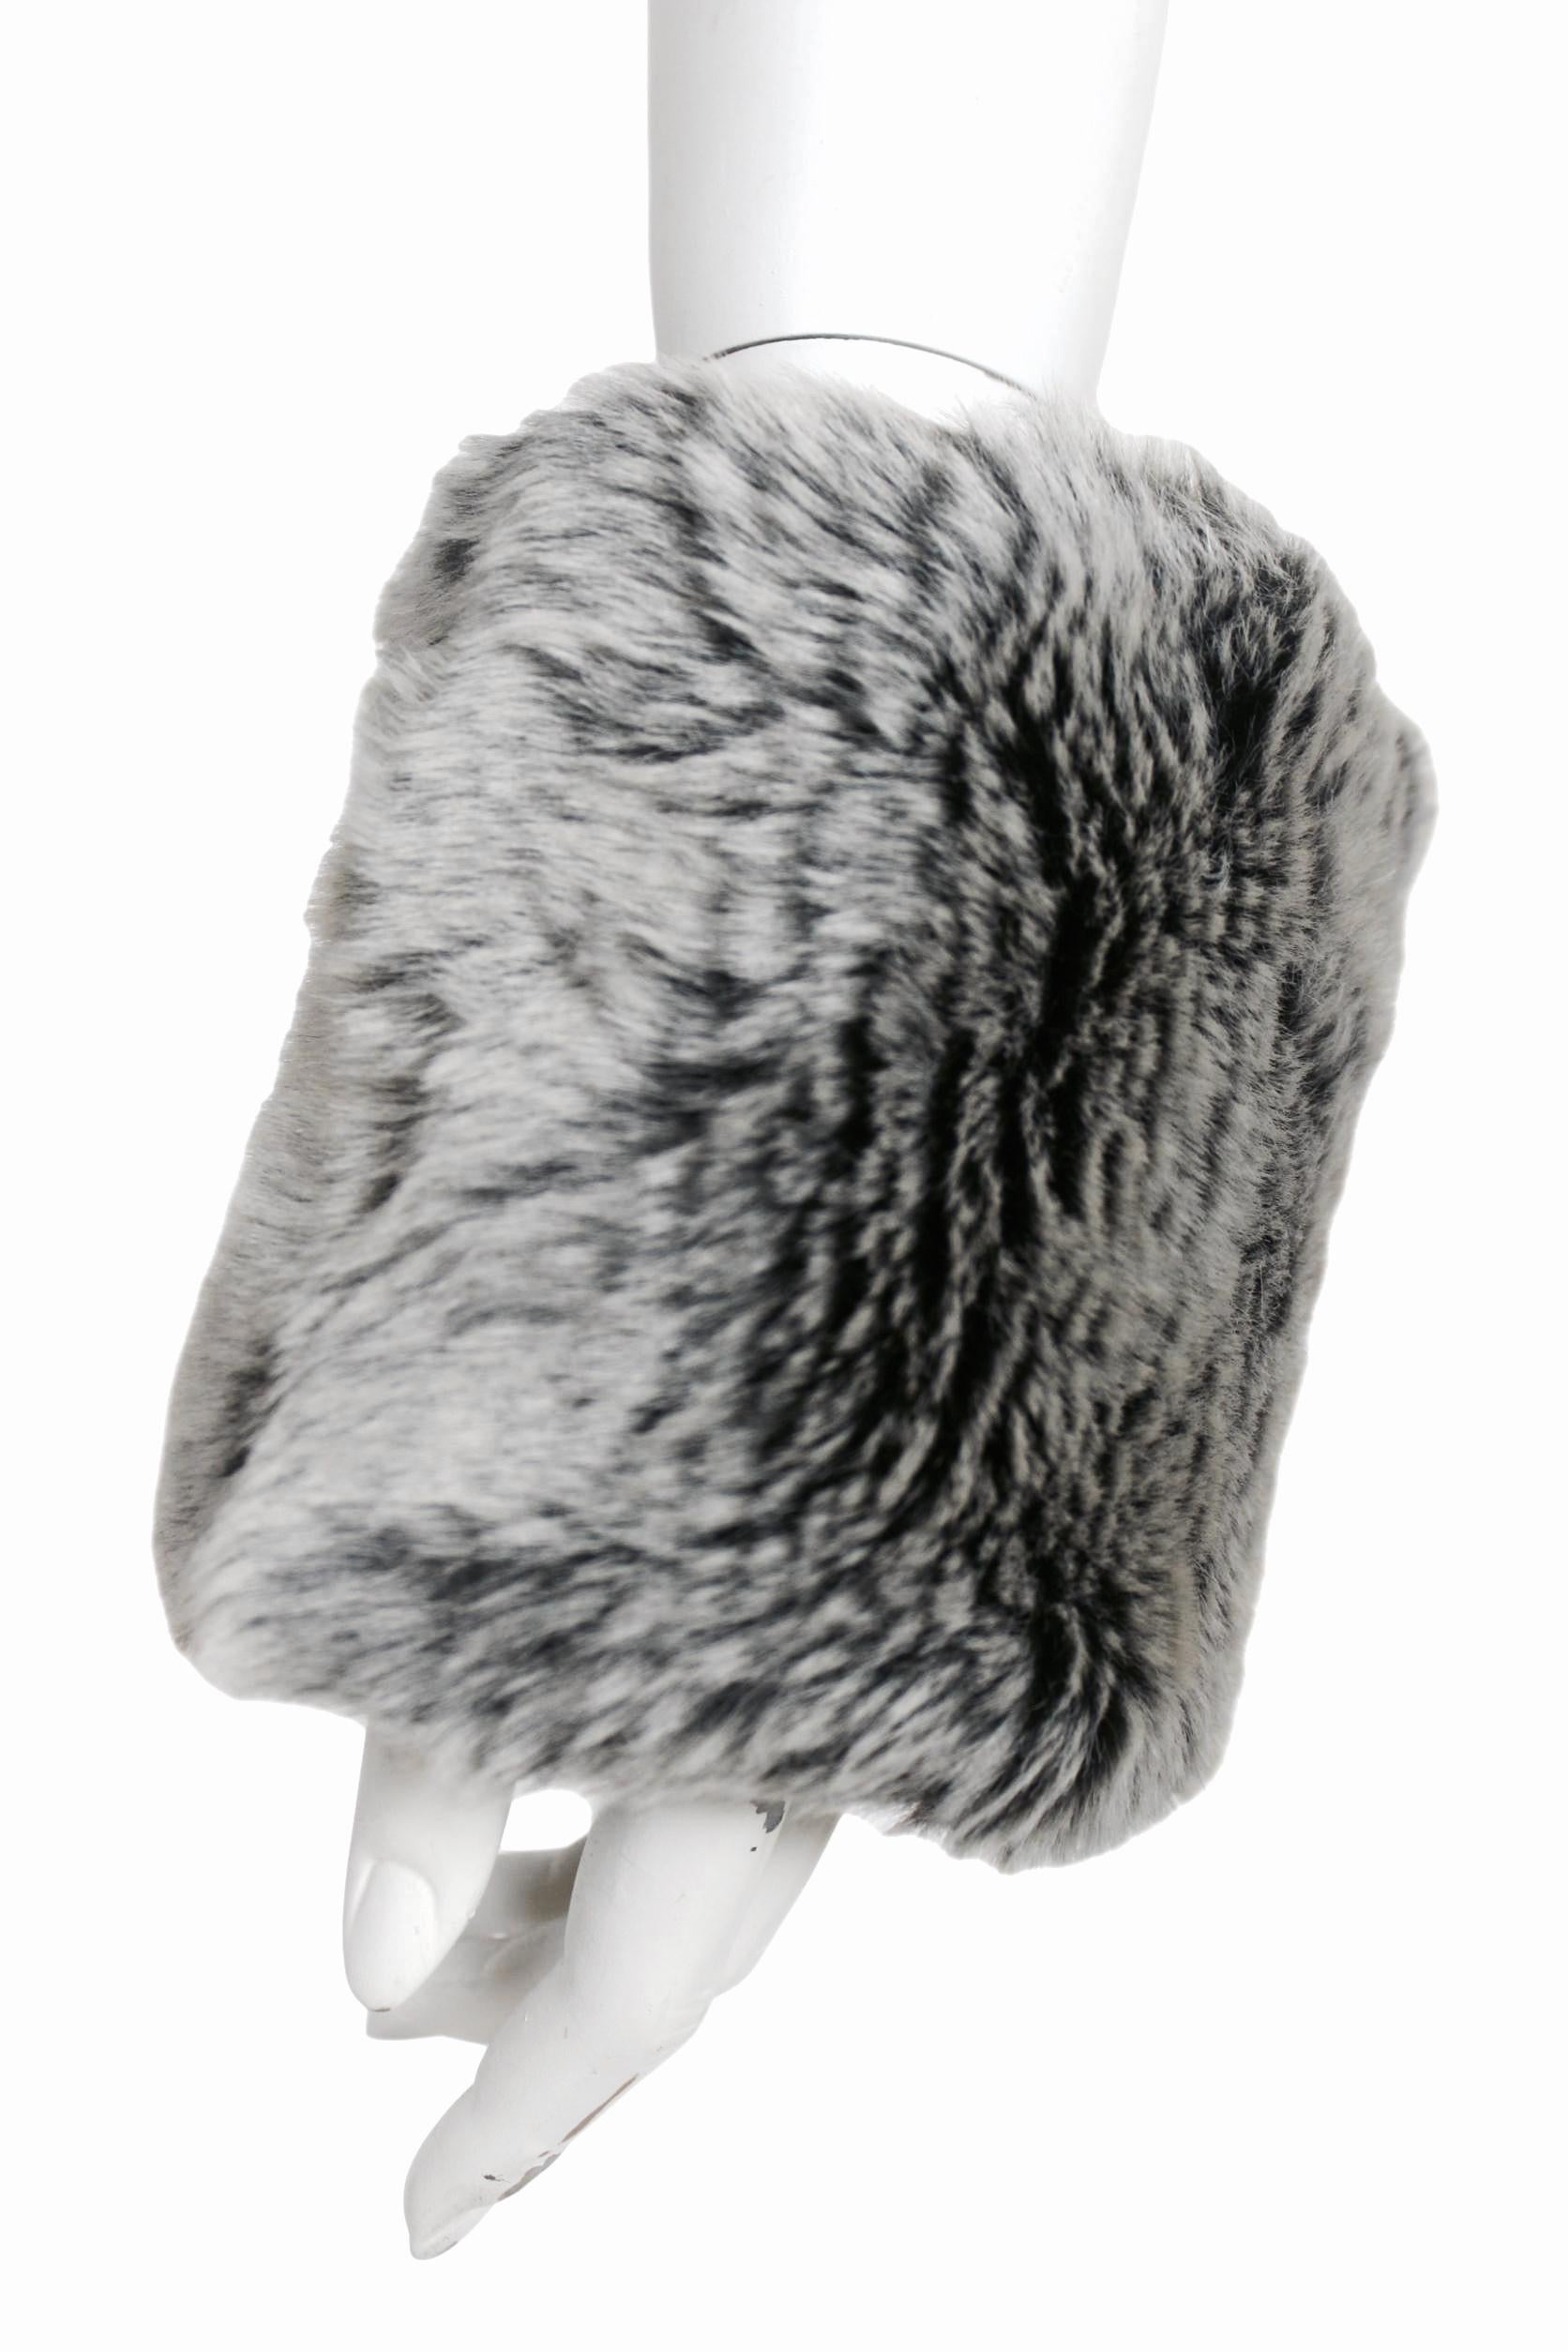 Women's Issey Miyake Faux Fur Pleats Please Cowl and Wrist Cuff Accessories  For Sale